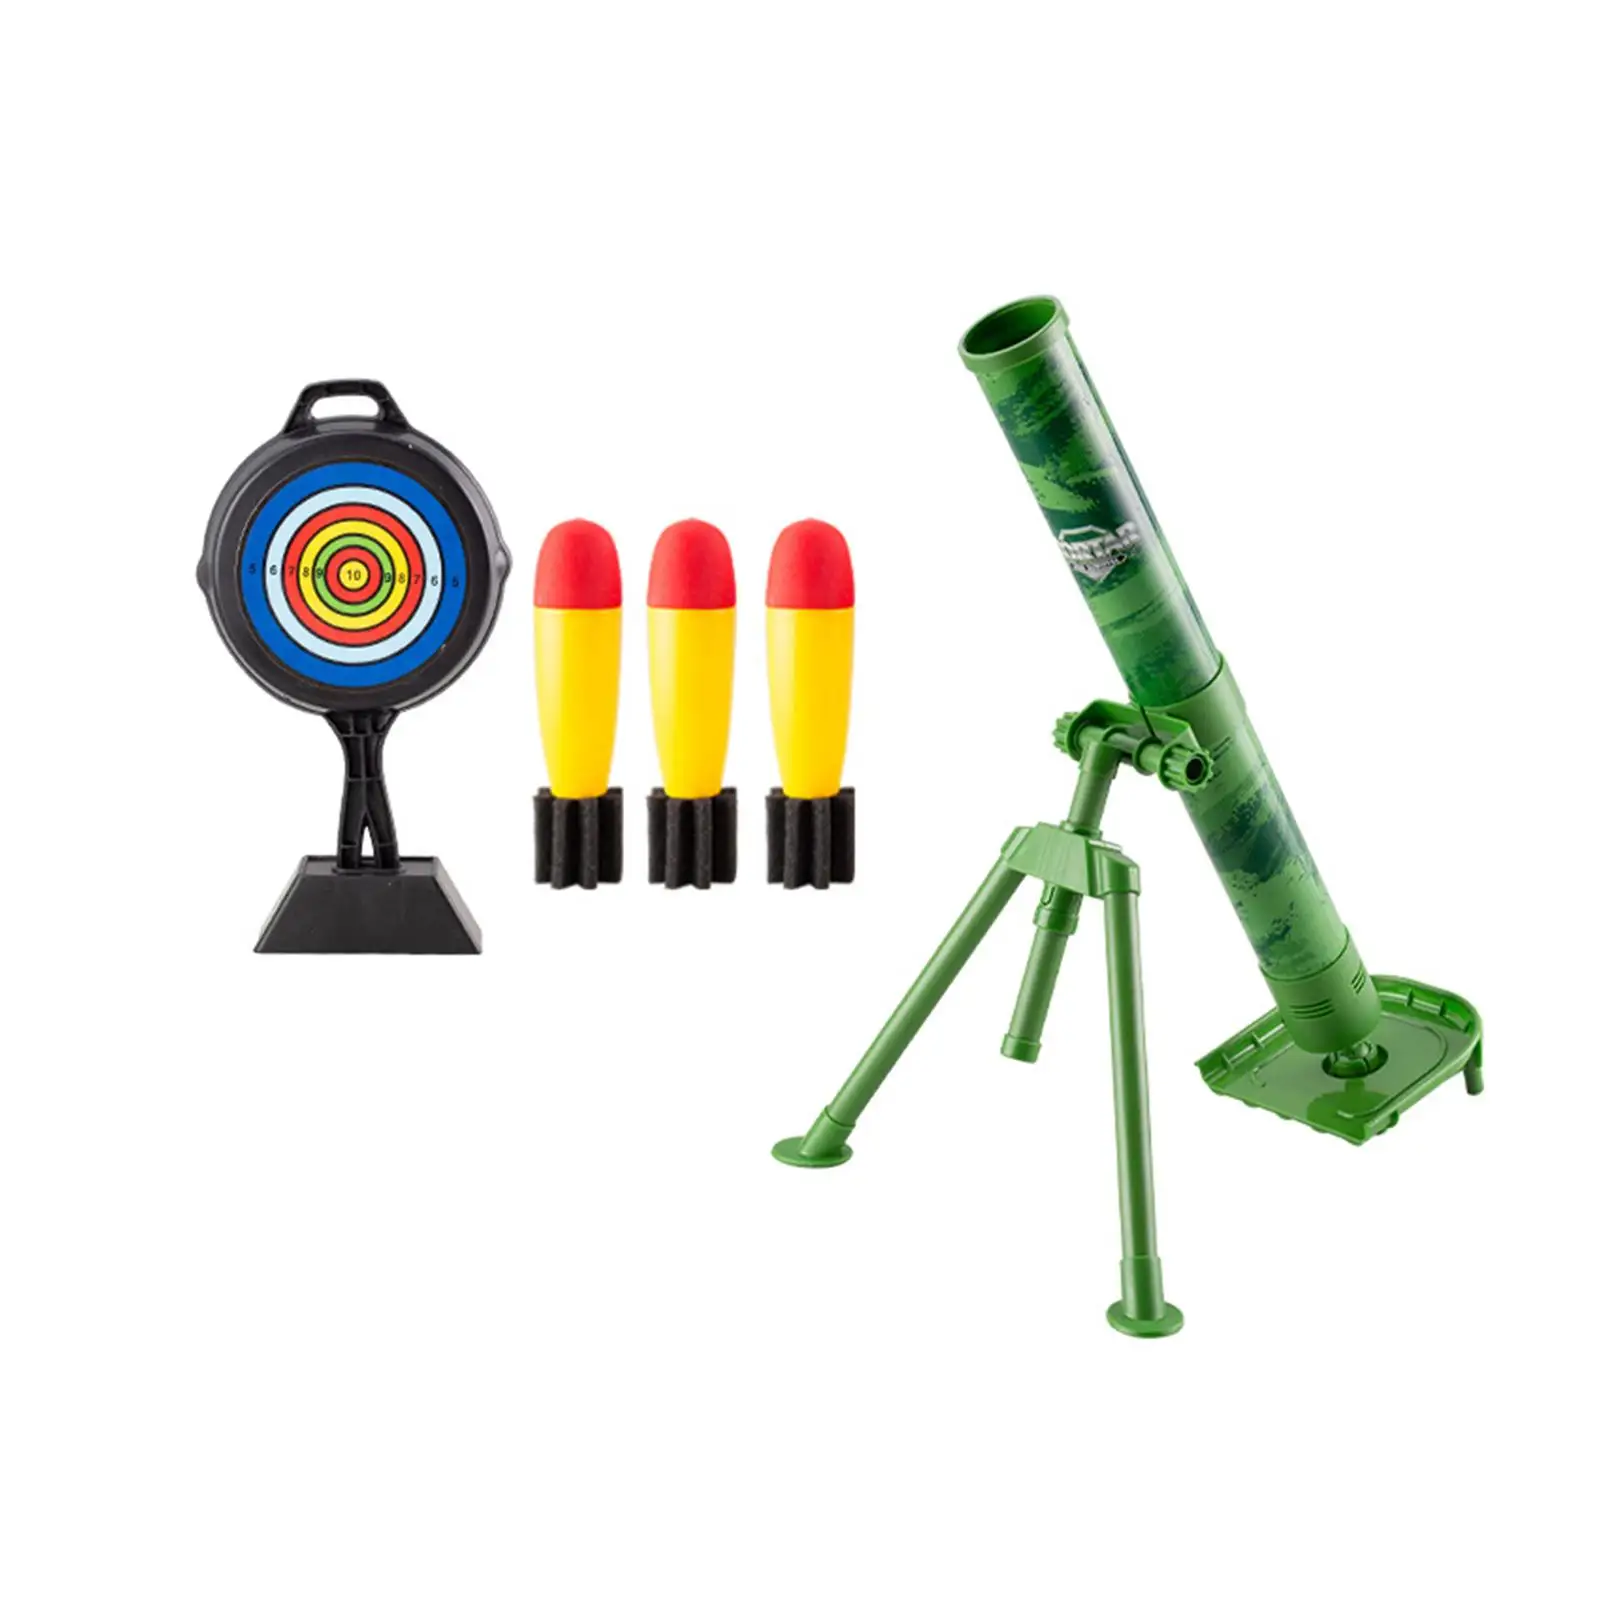 Mortar Launcher Toys with Launch Set for Boys and Girls Festival Gifts